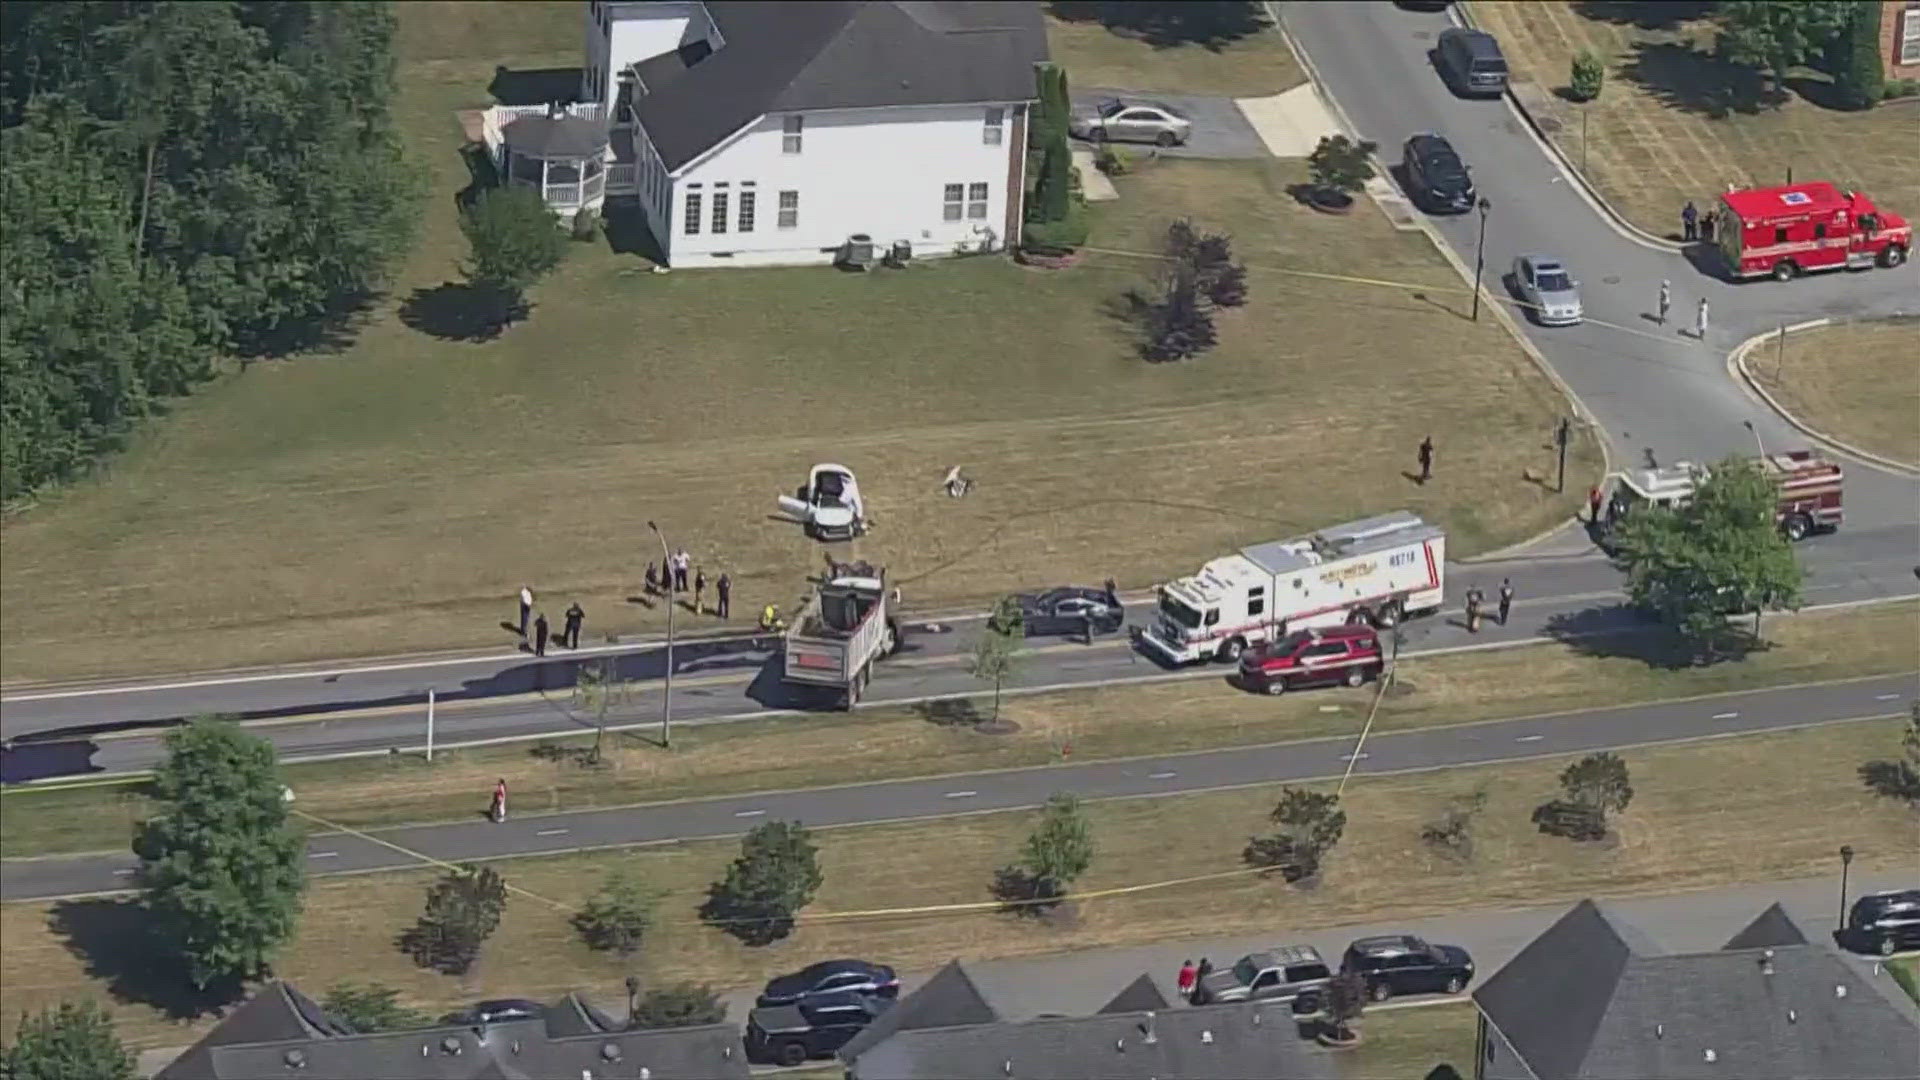 One person was killed and a child has been rushed to the hospital after a crash involving a car and a dump truck in Beltsville on Friday afternoon.